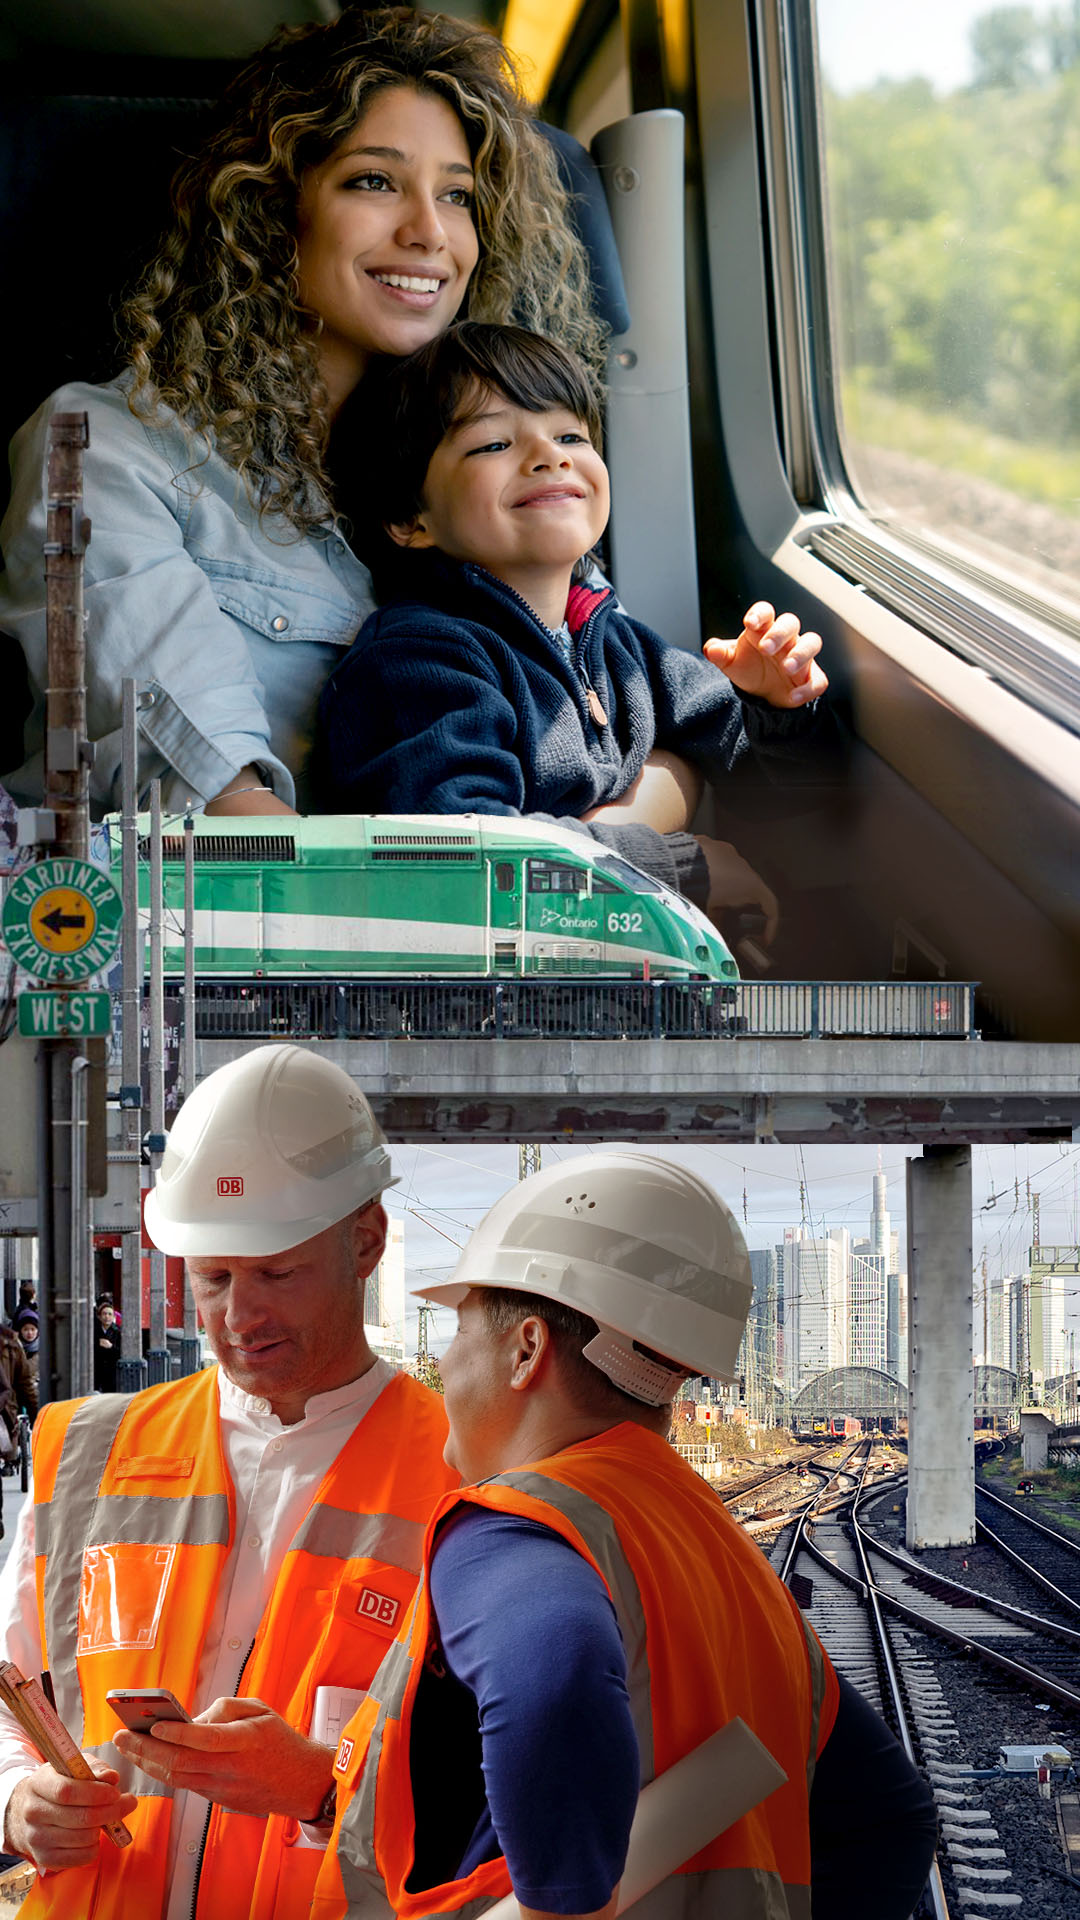 Services: Image montage with woman and child looking out of the train, a traffic shot with train and cars and employees with safety gear on the track